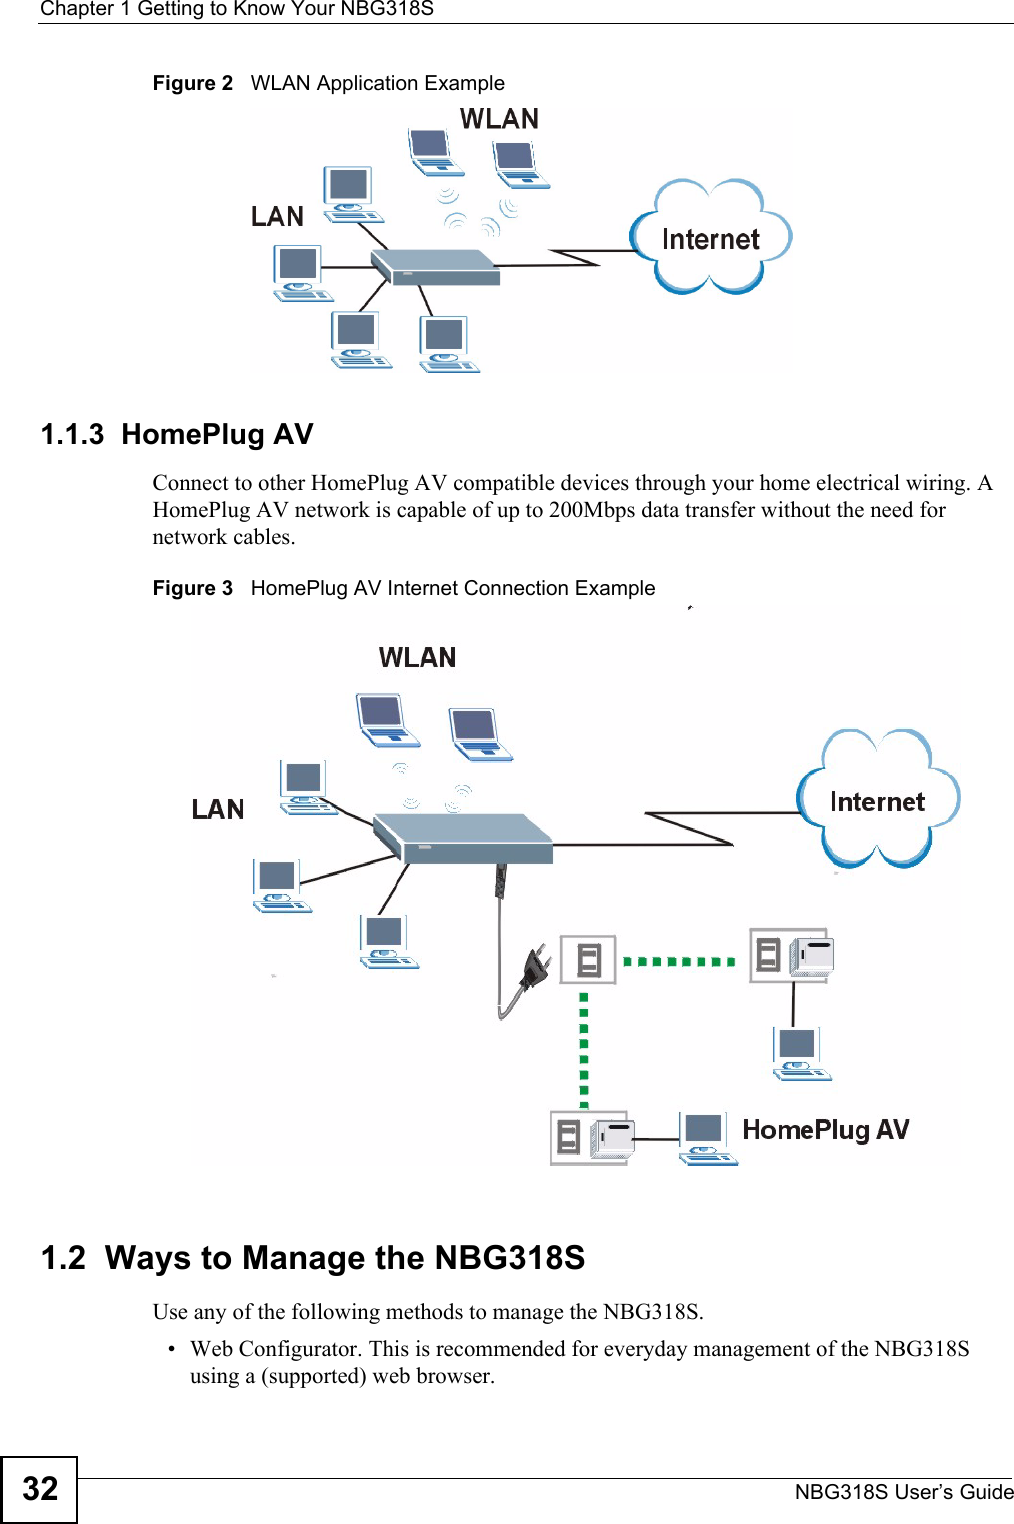 Chapter 1 Getting to Know Your NBG318SNBG318S User’s Guide32Figure 2   WLAN Application Example1.1.3  HomePlug AVConnect to other HomePlug AV compatible devices through your home electrical wiring. A HomePlug AV network is capable of up to 200Mbps data transfer without the need for network cables.Figure 3   HomePlug AV Internet Connection Example   1.2  Ways to Manage the NBG318SUse any of the following methods to manage the NBG318S.• Web Configurator. This is recommended for everyday management of the NBG318S using a (supported) web browser. 